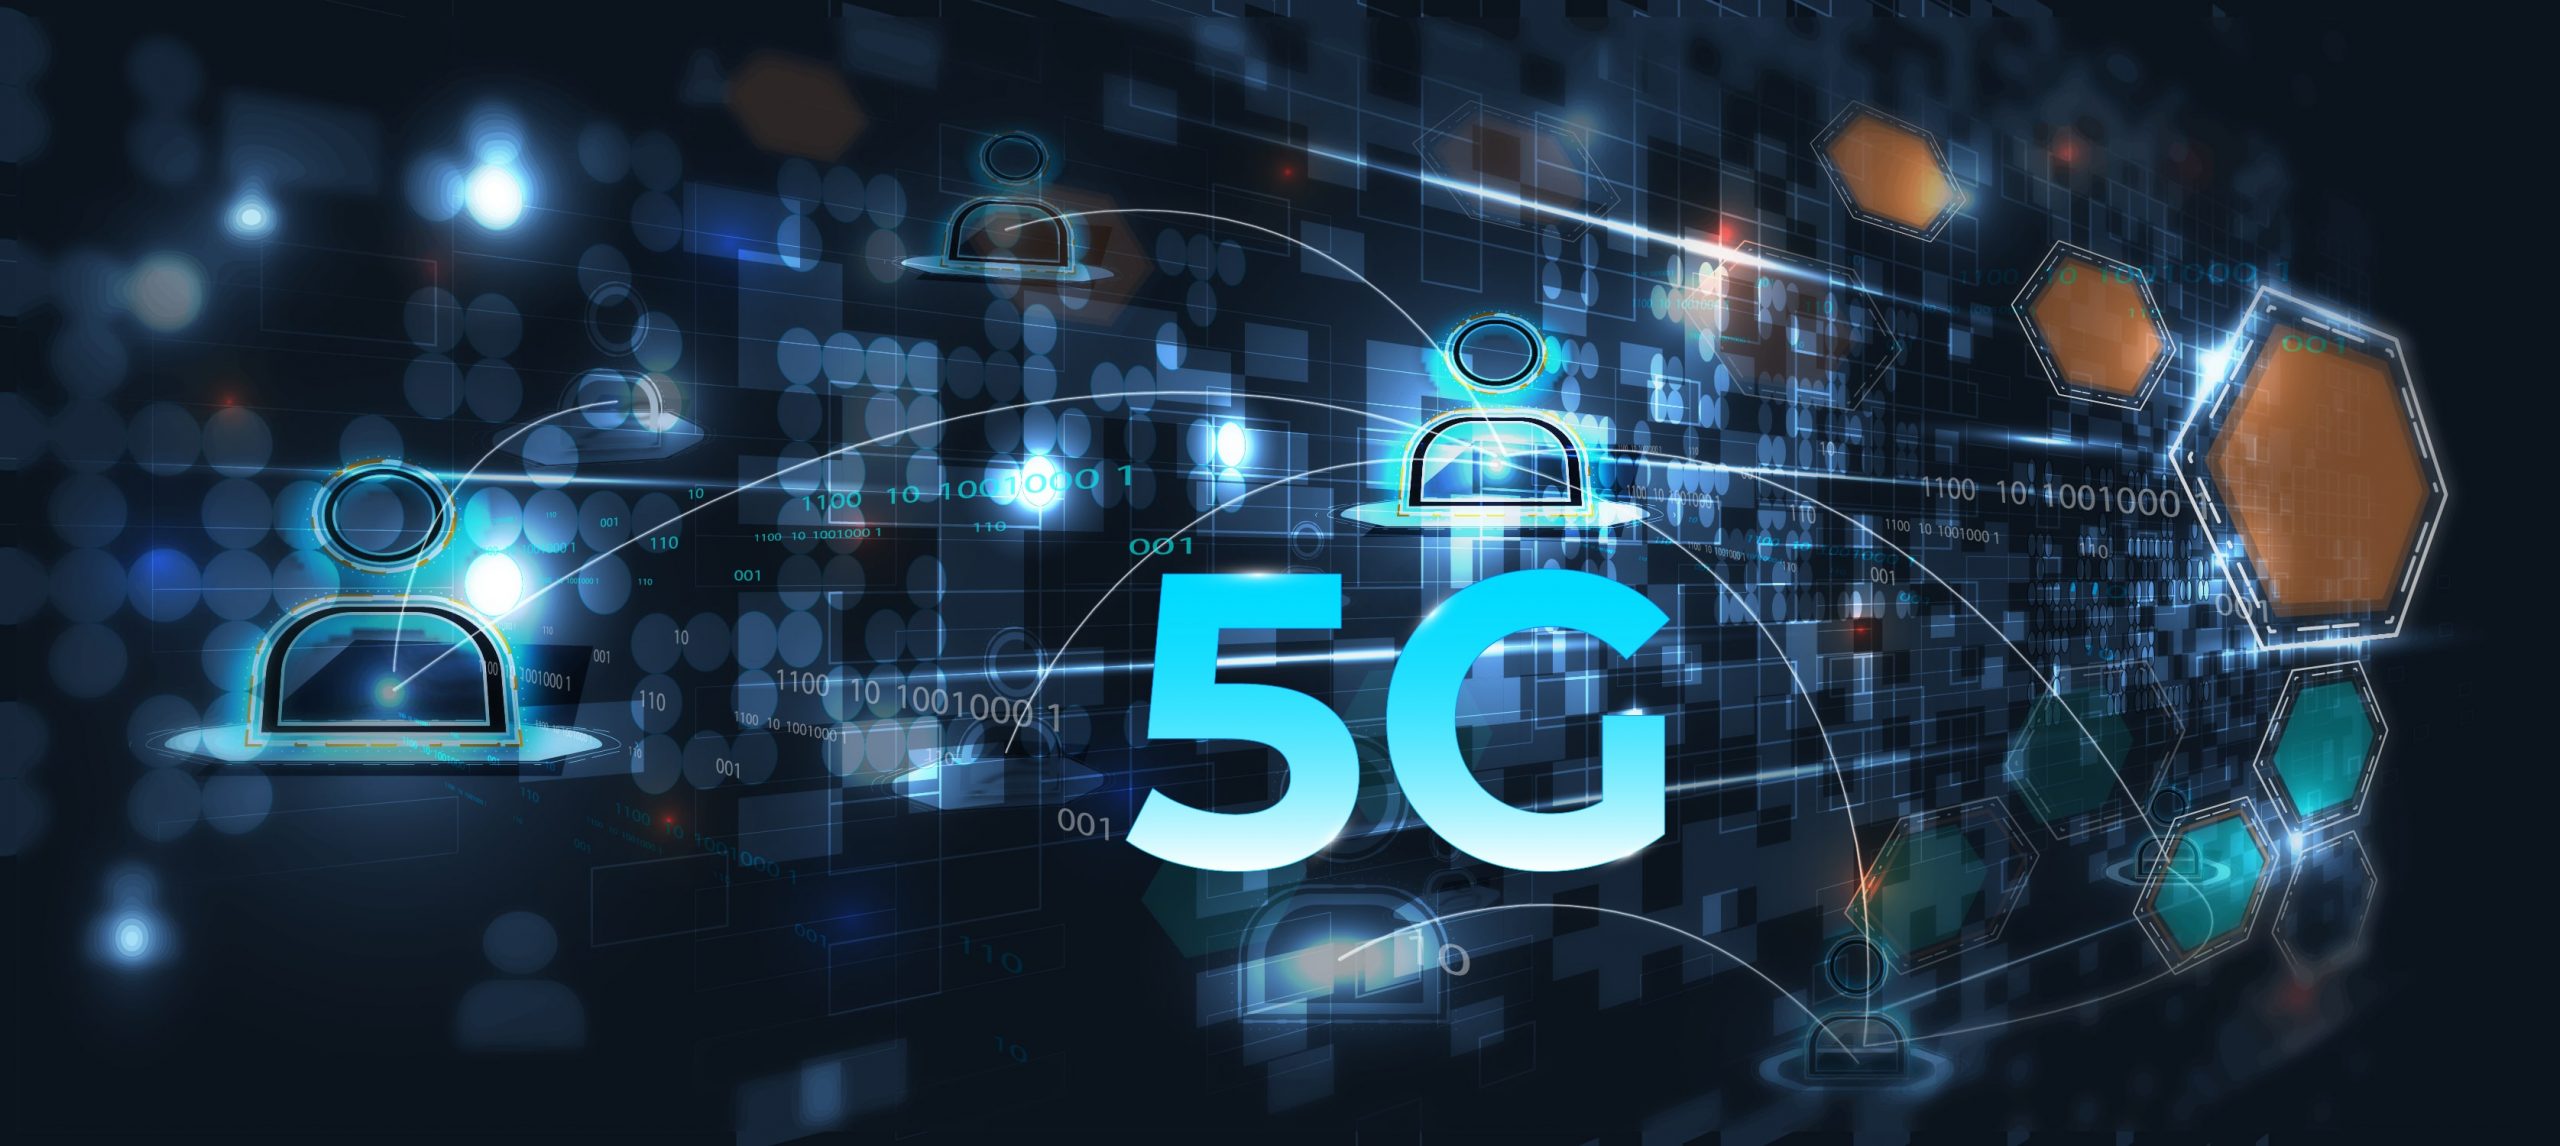 Enhanced Monitoring And Analytics For 5G Lawful Intelligence